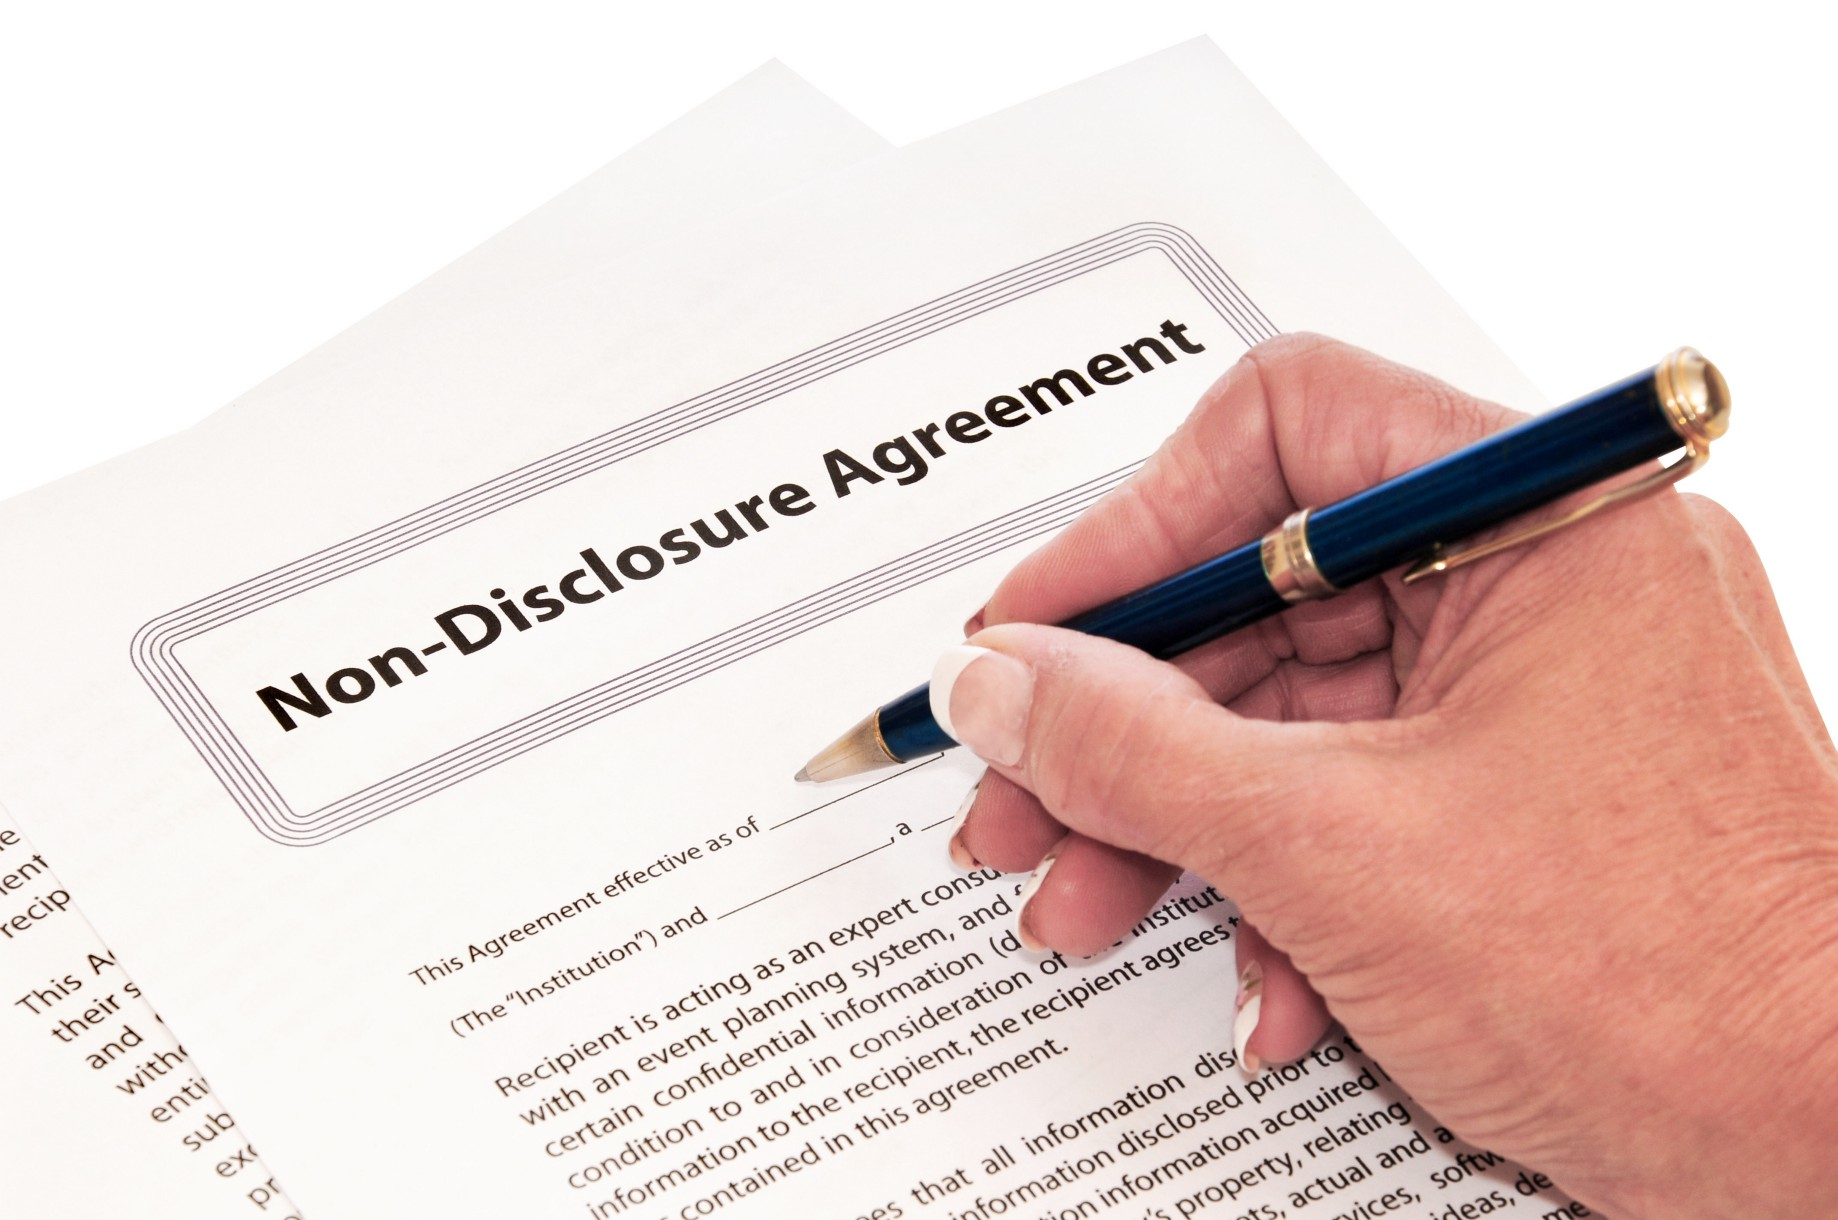 Website Design Non Disclosure Agreement Ndas When To Use And When Not To Use Them Supplyframe Medium